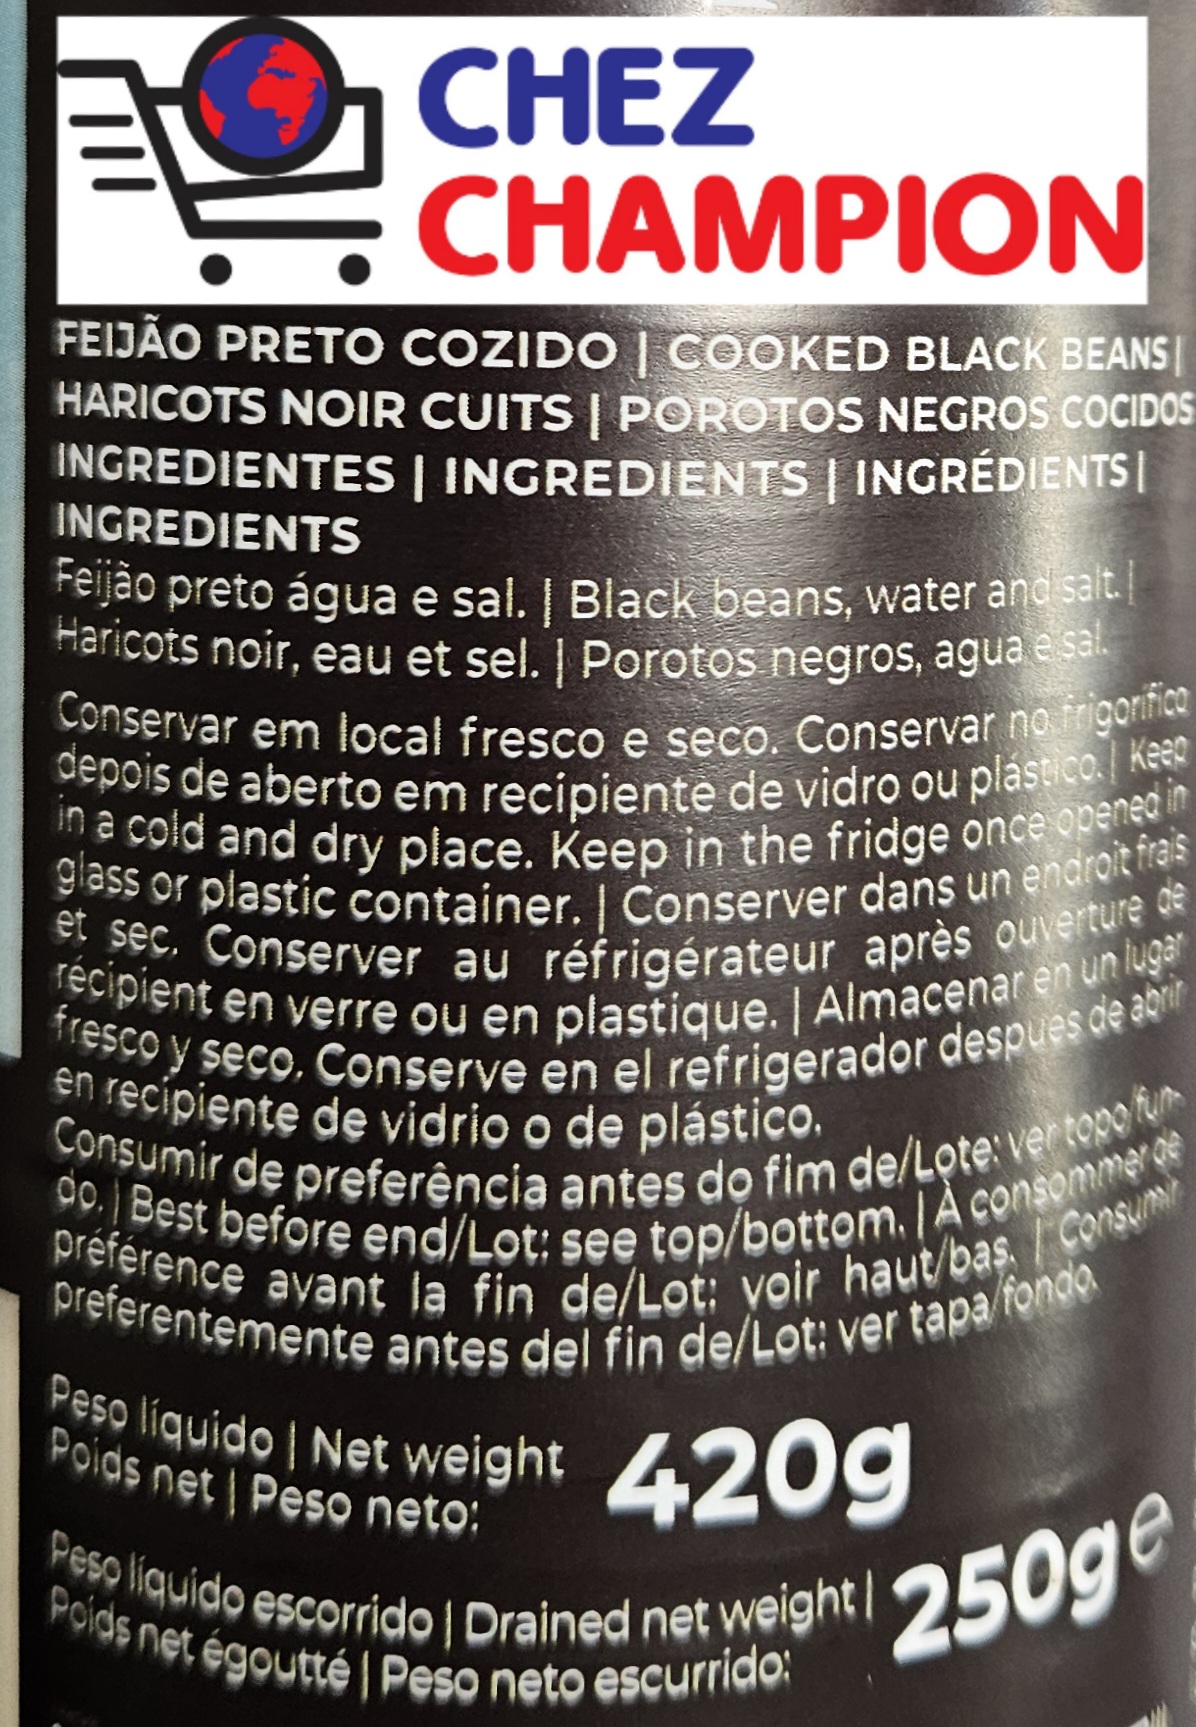 Meps feijao preto cozido – haricots noirs cuits – cooked black beans – porotos negros cocidos – 420g